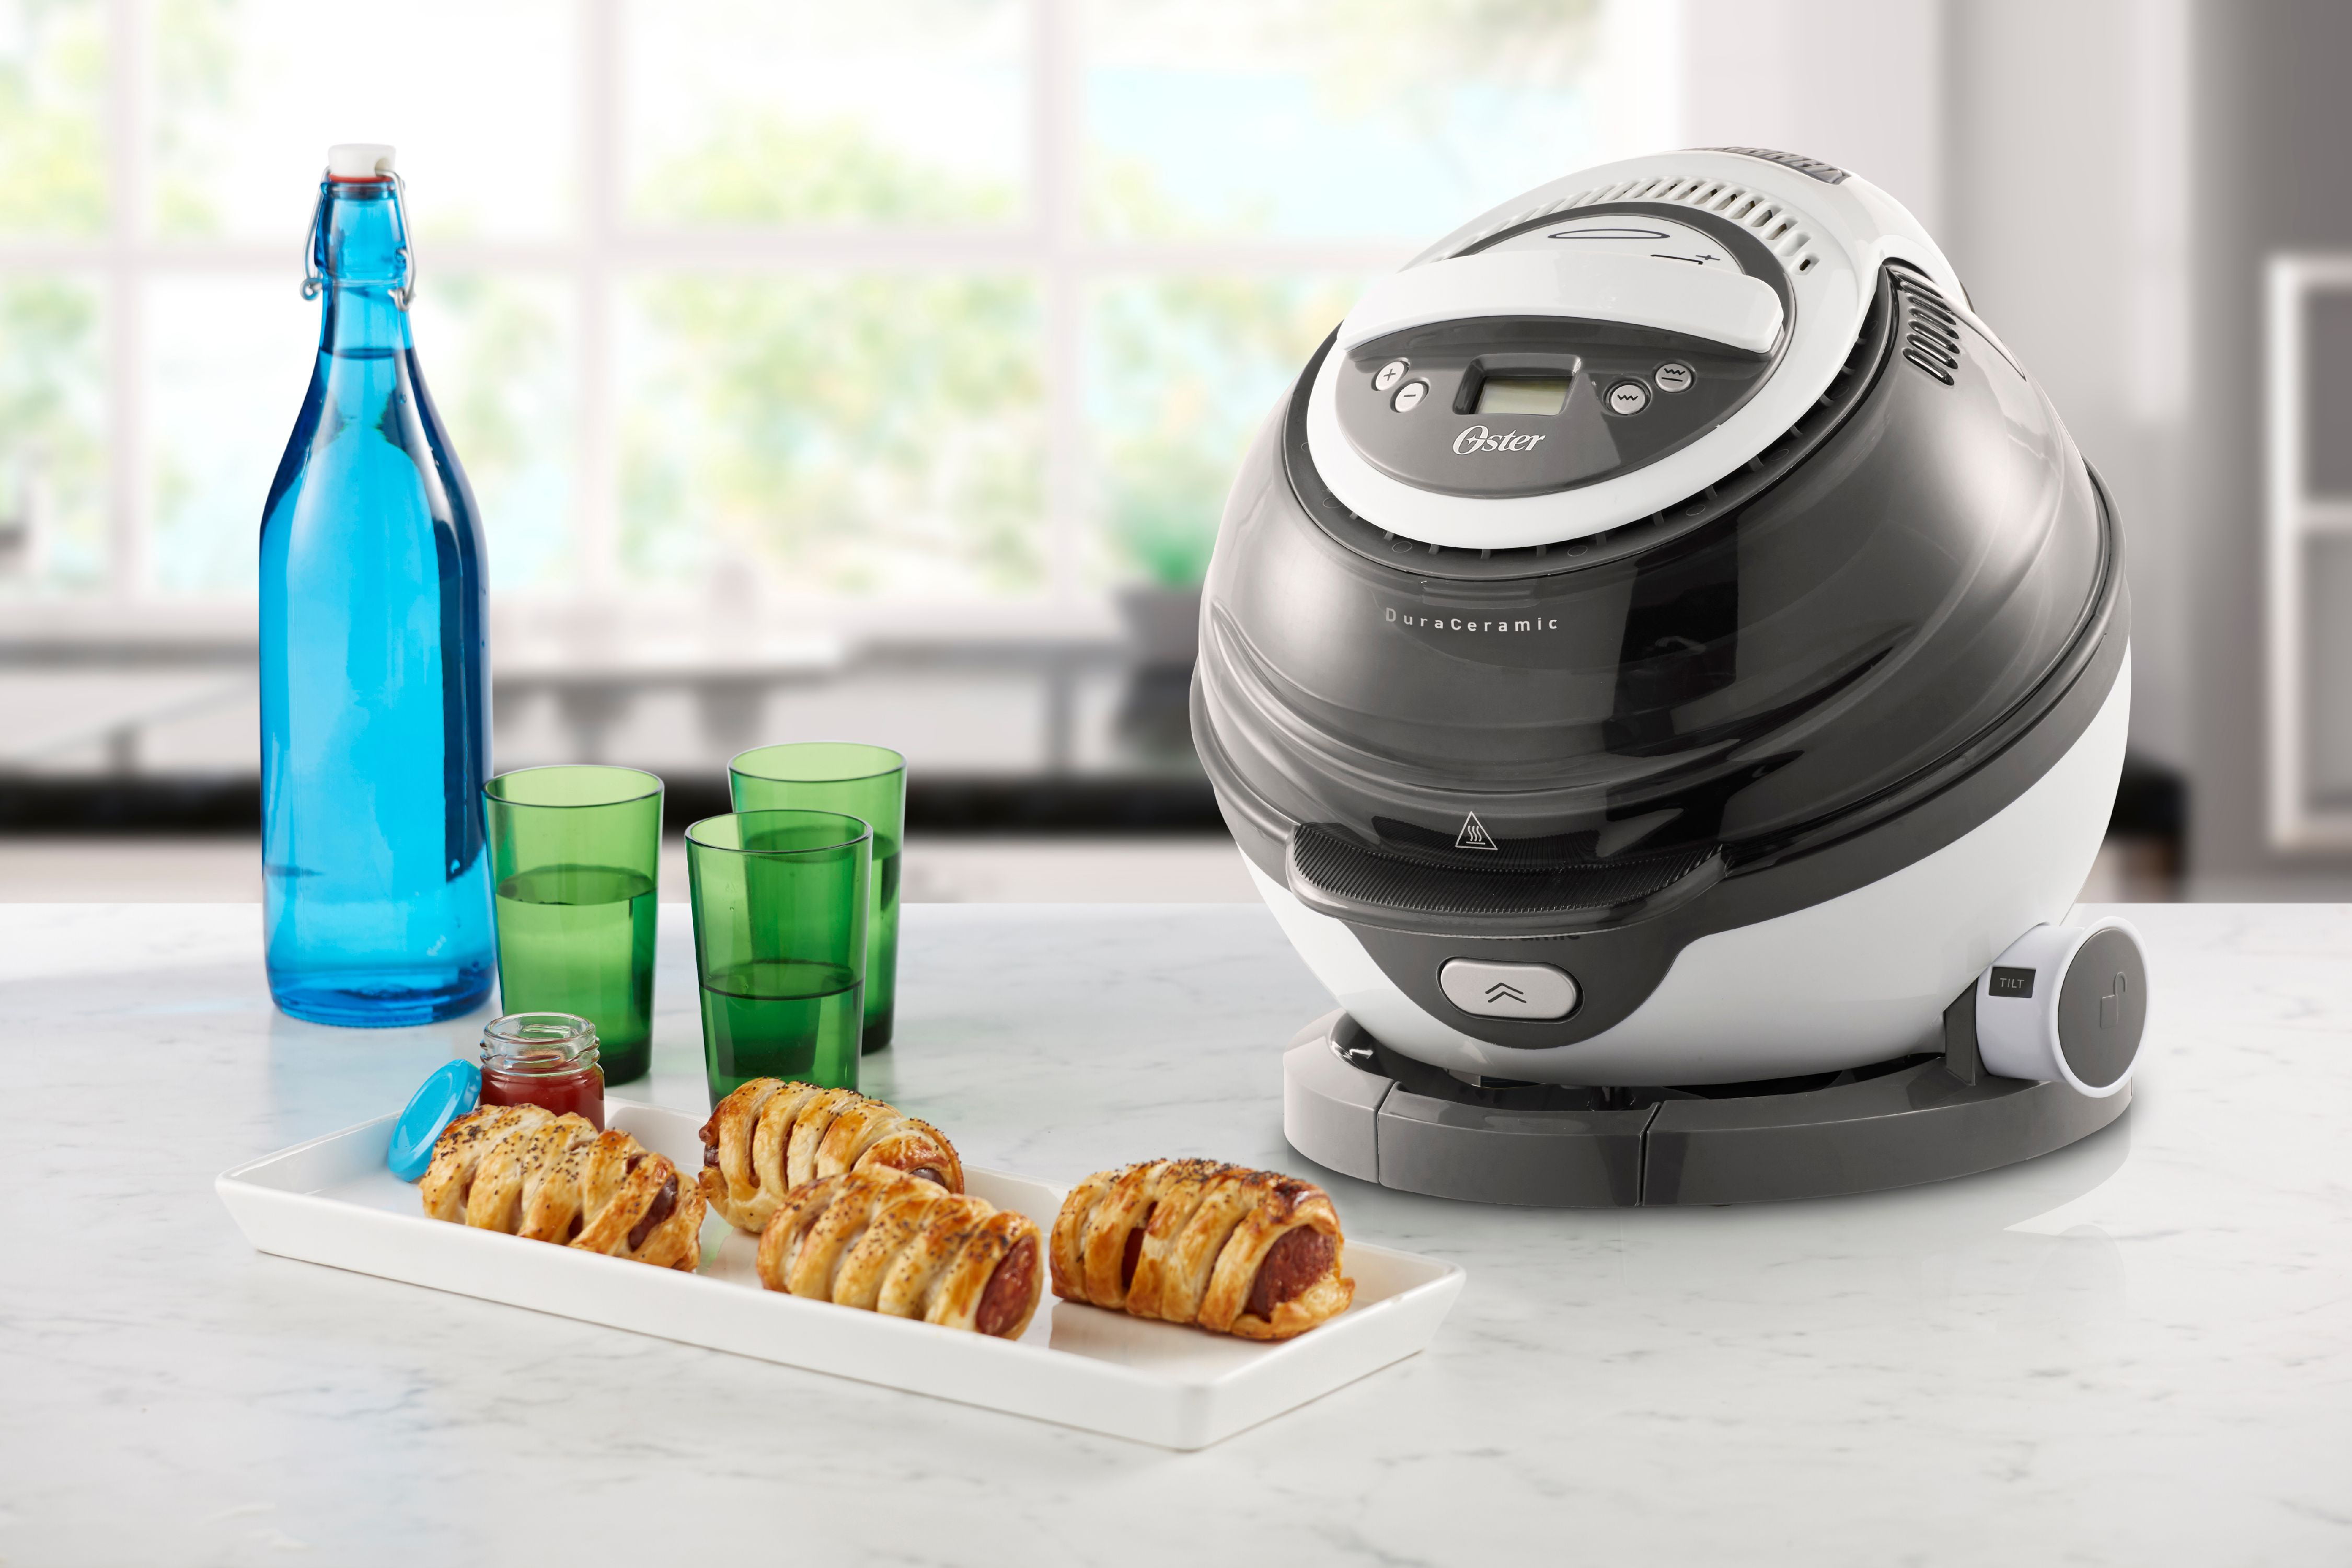 Review: Oster's DuraCeramic Air Fryer Tilts and Rotates to Ensure